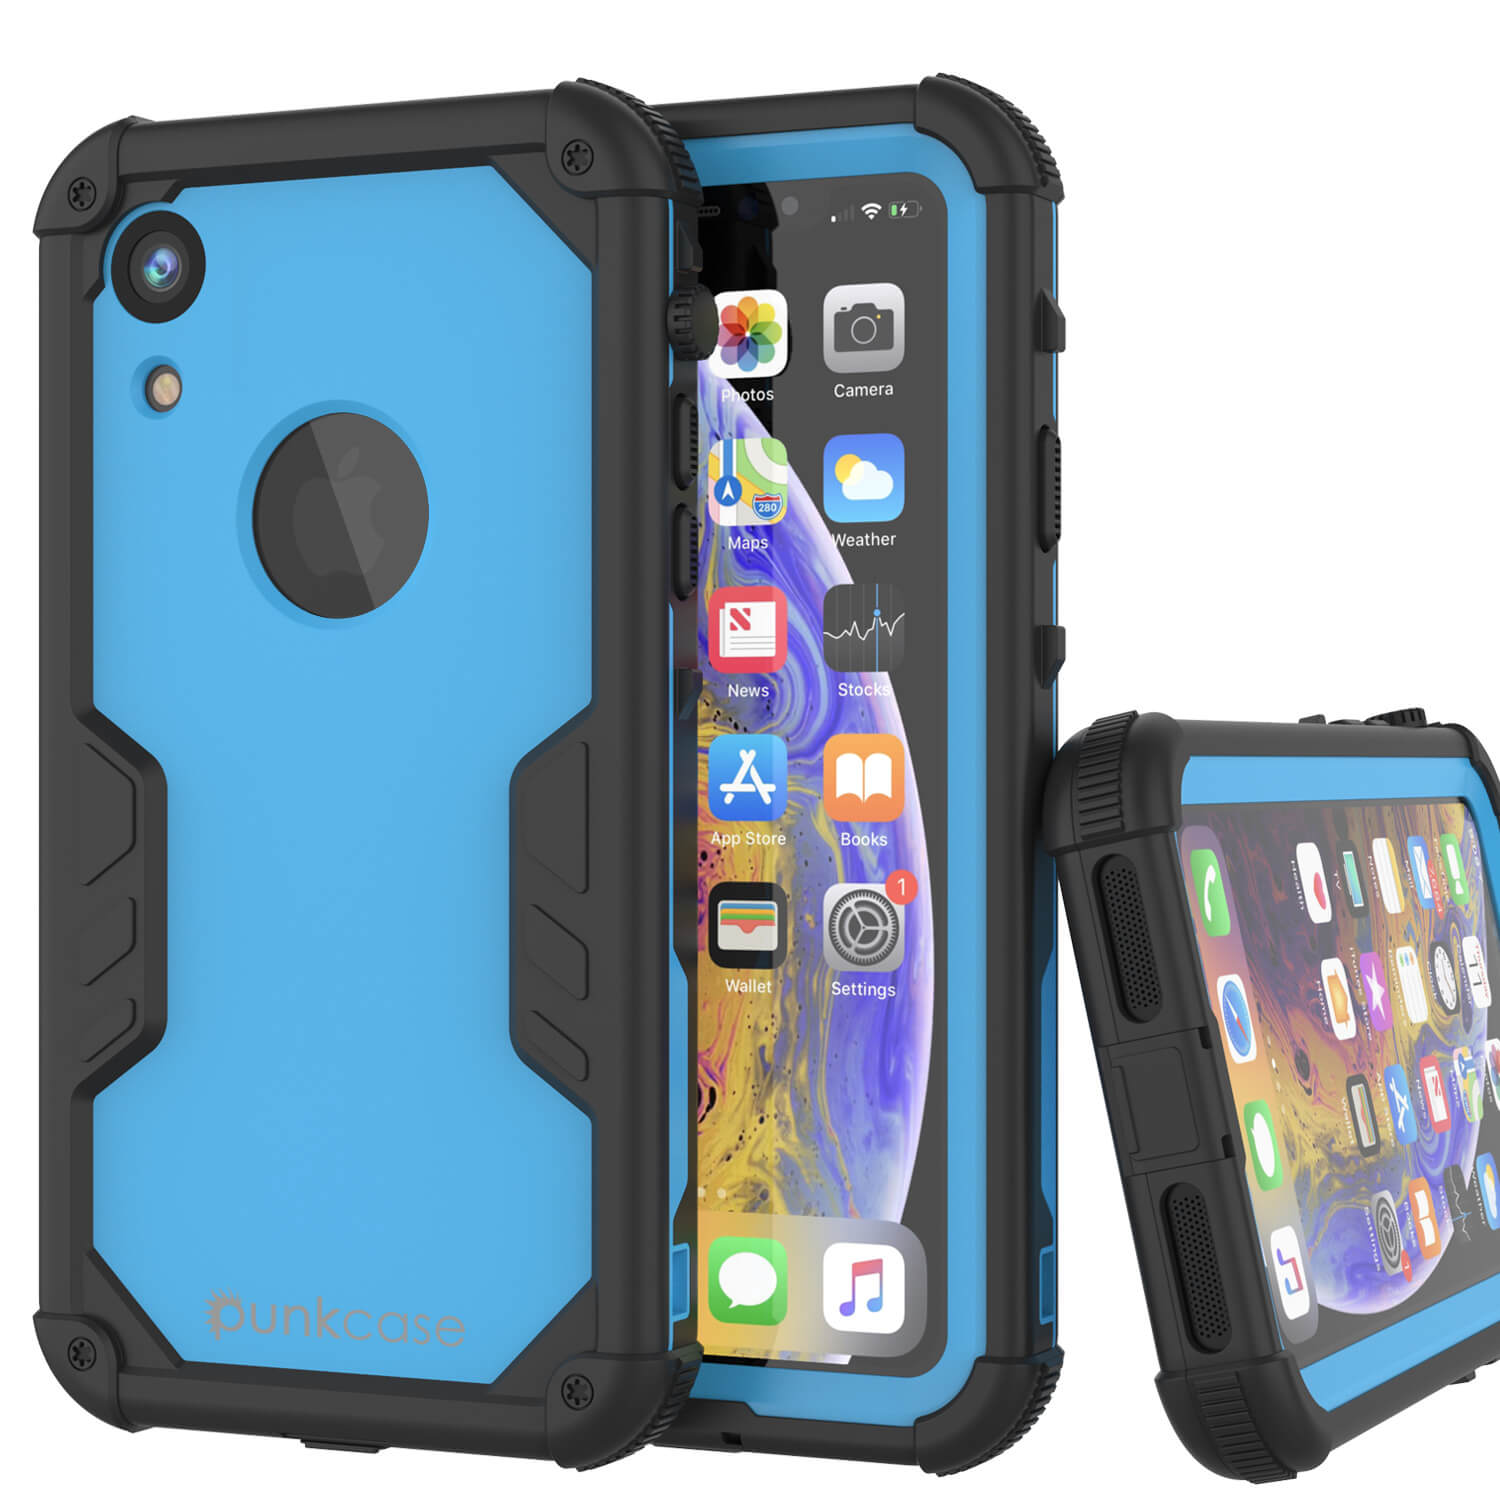 iPhone XR Waterproof / Shockproof Case with mounting solutions – ARMOR-X